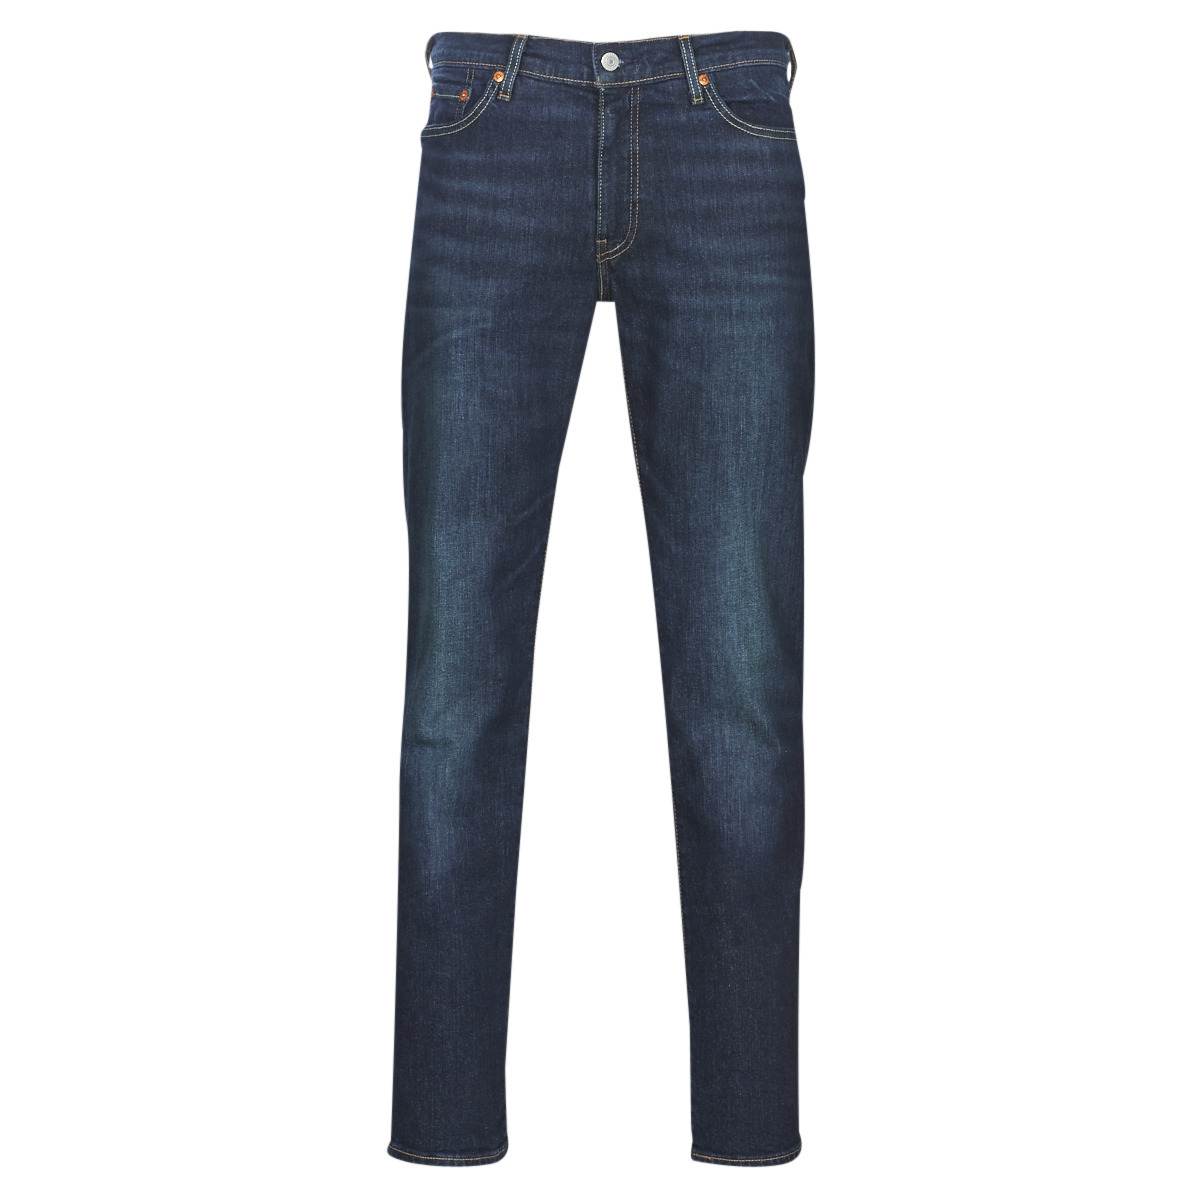 Gent Skinny Jeans in Blue from Spartoo GOOFASH